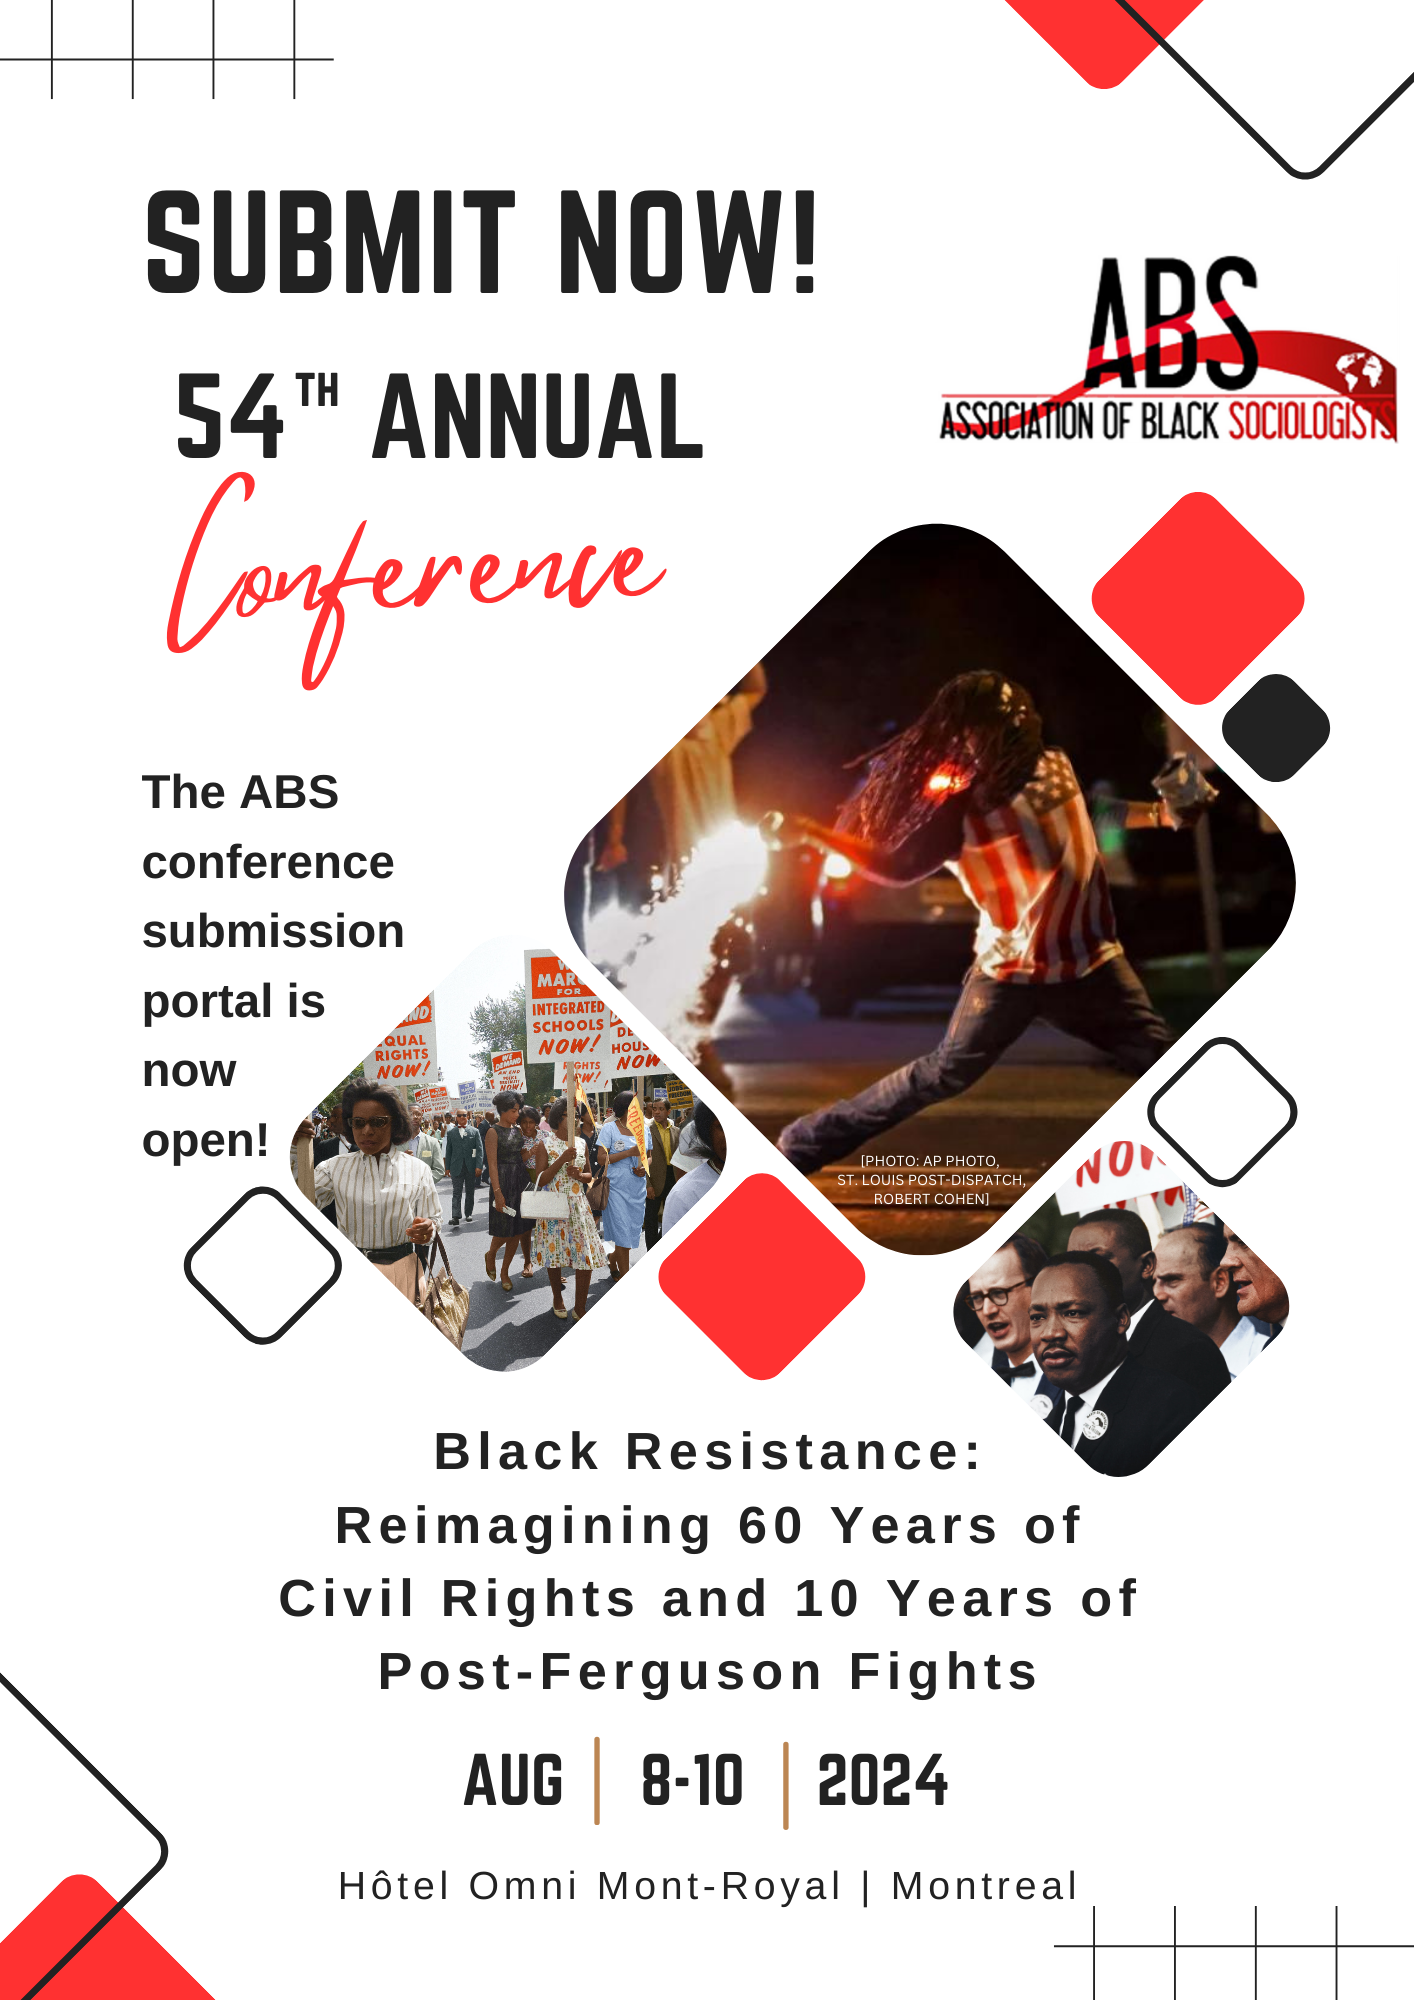 ABS Conference submission portal is now open